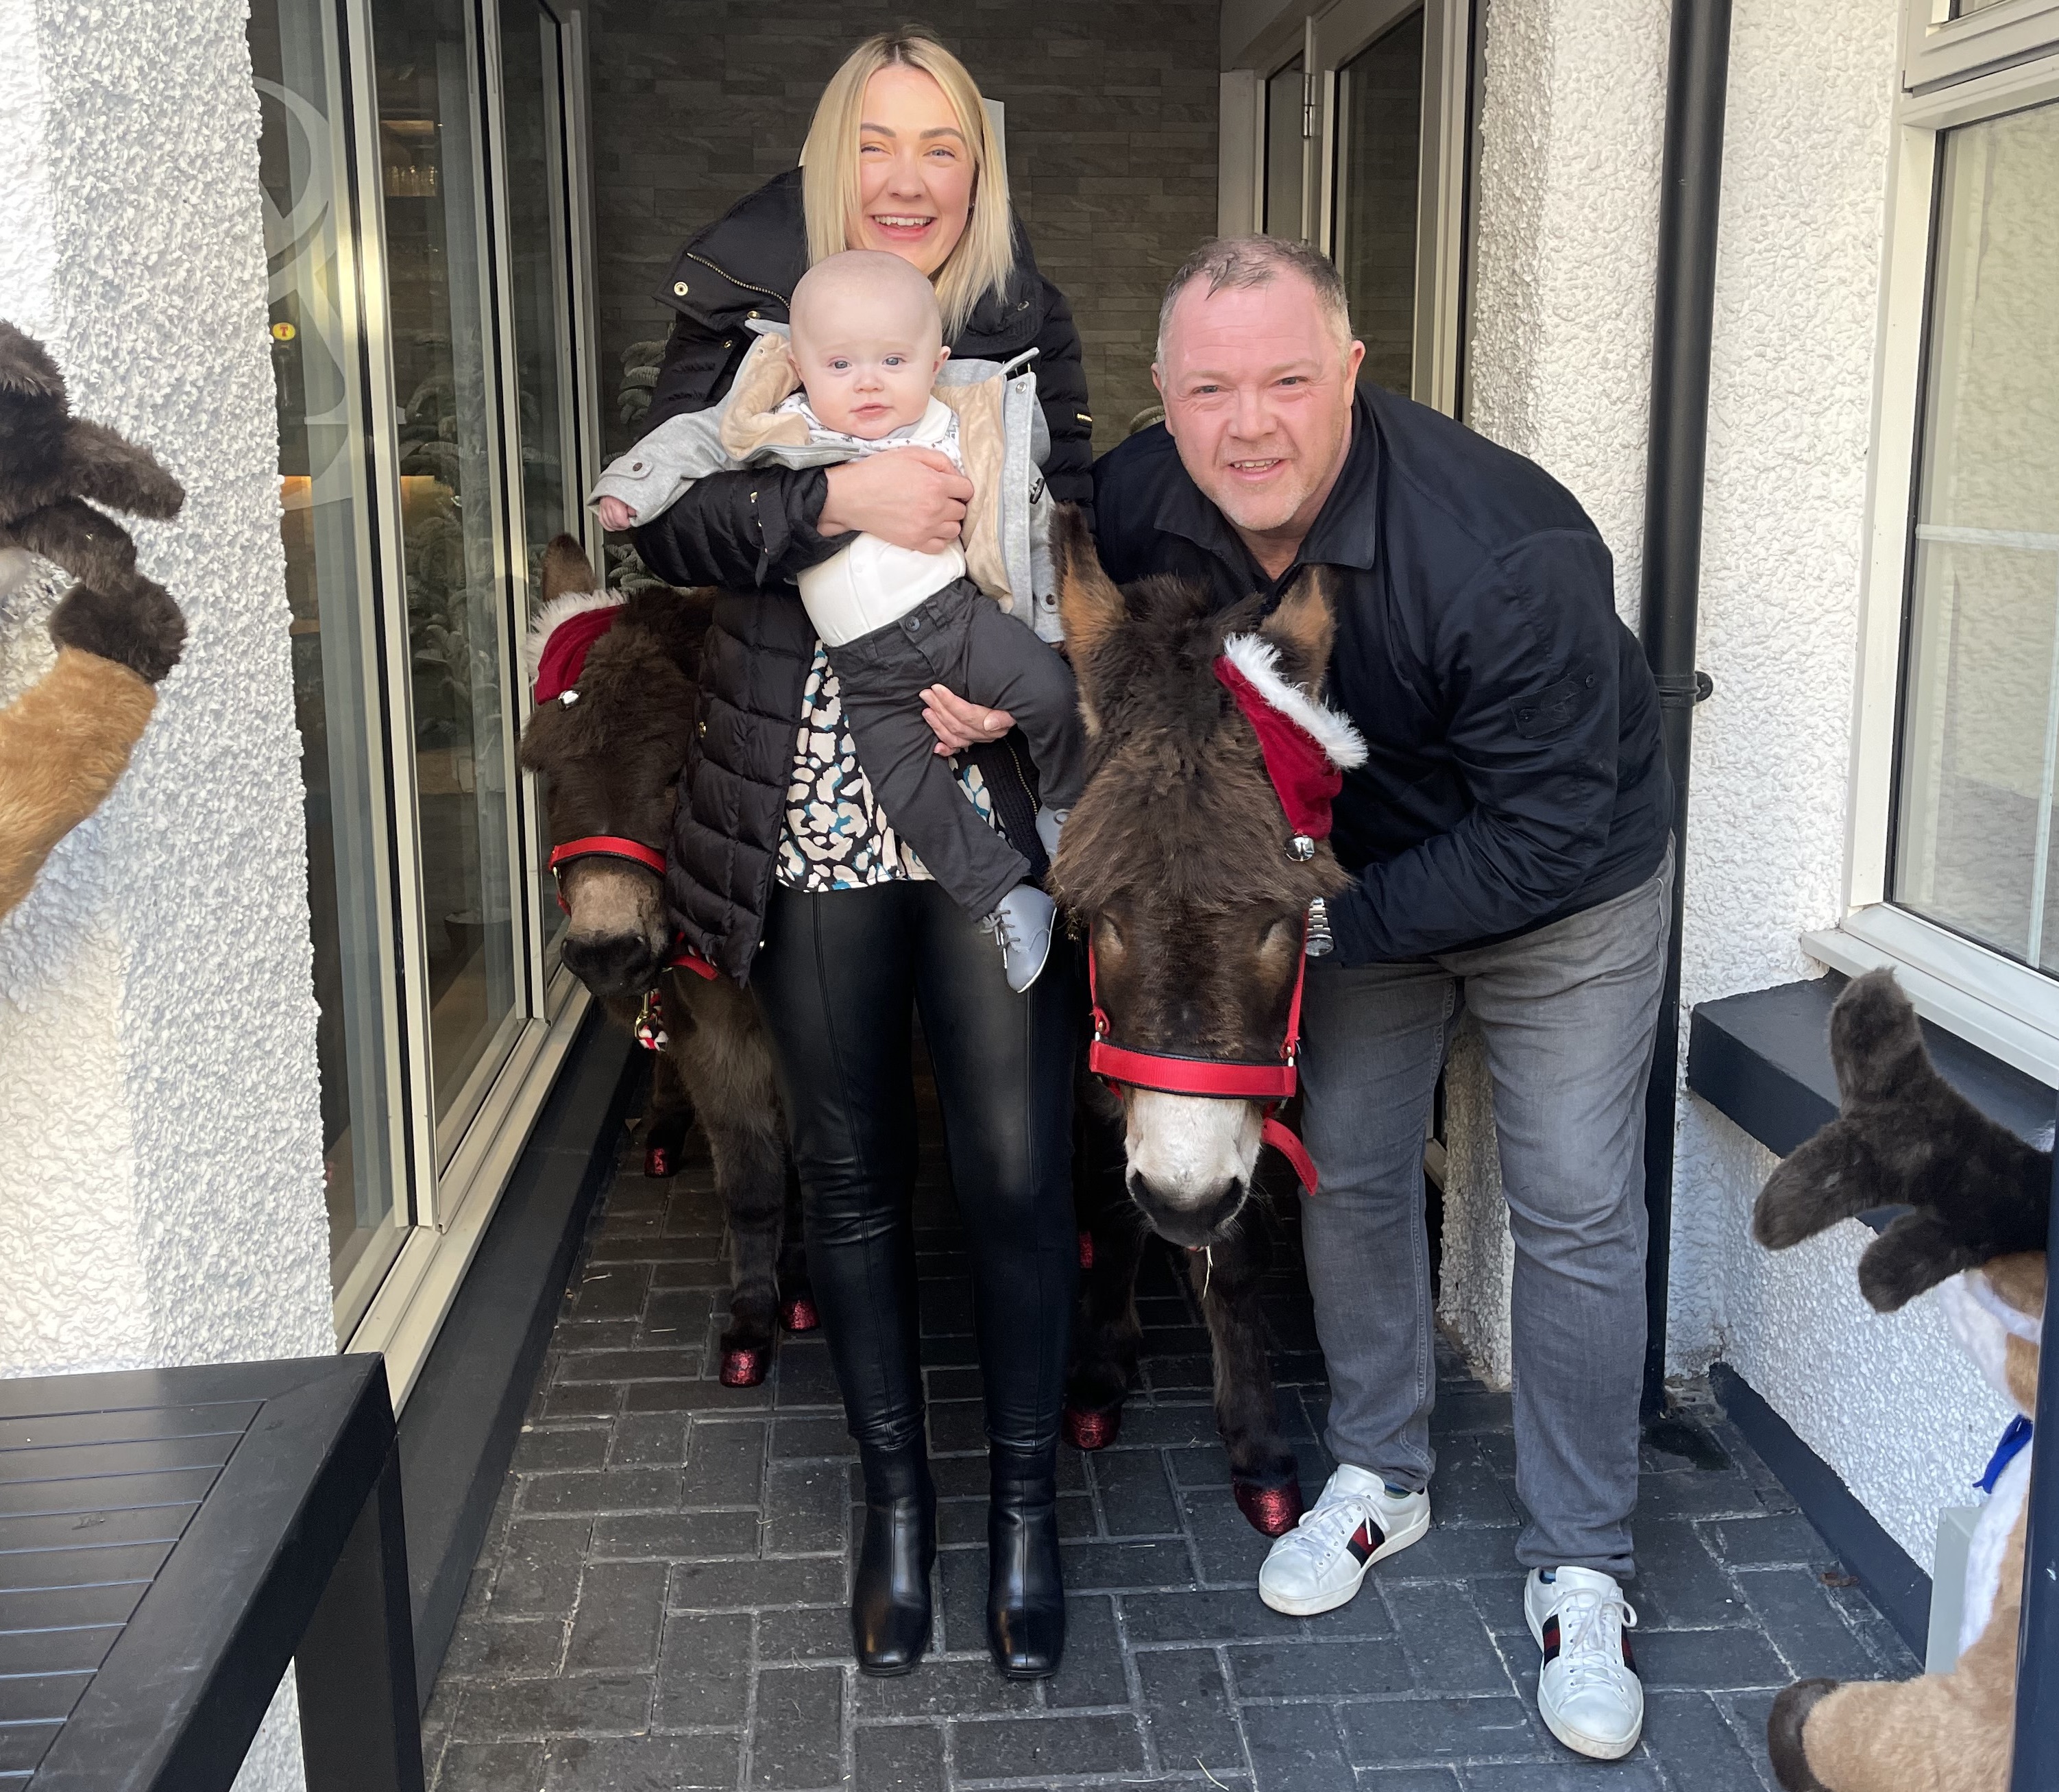 Above: David Robertson with wife Nicola, son Hudson and two friendly donkeys!